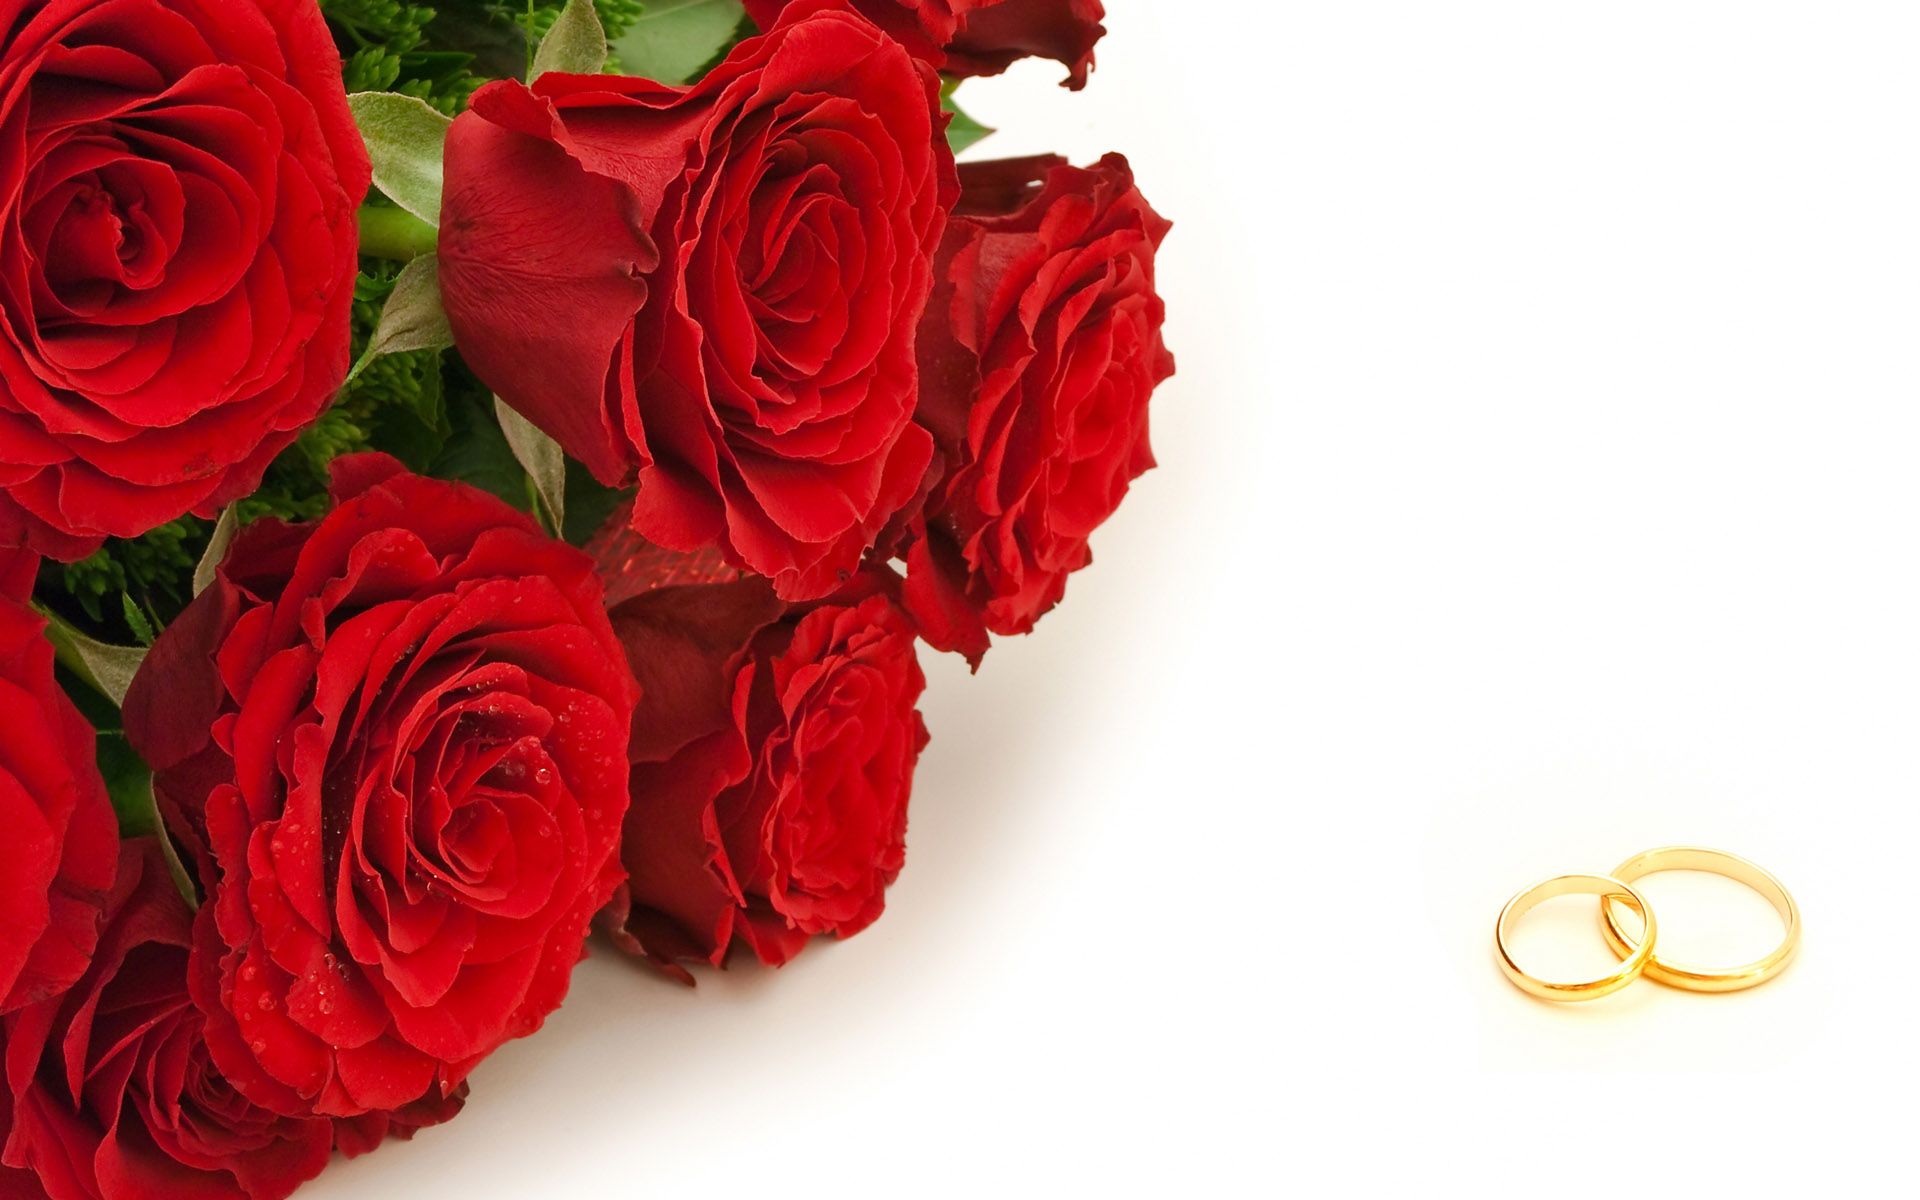 Wedding Ring Wallpapers - HD Wallpapers 83875